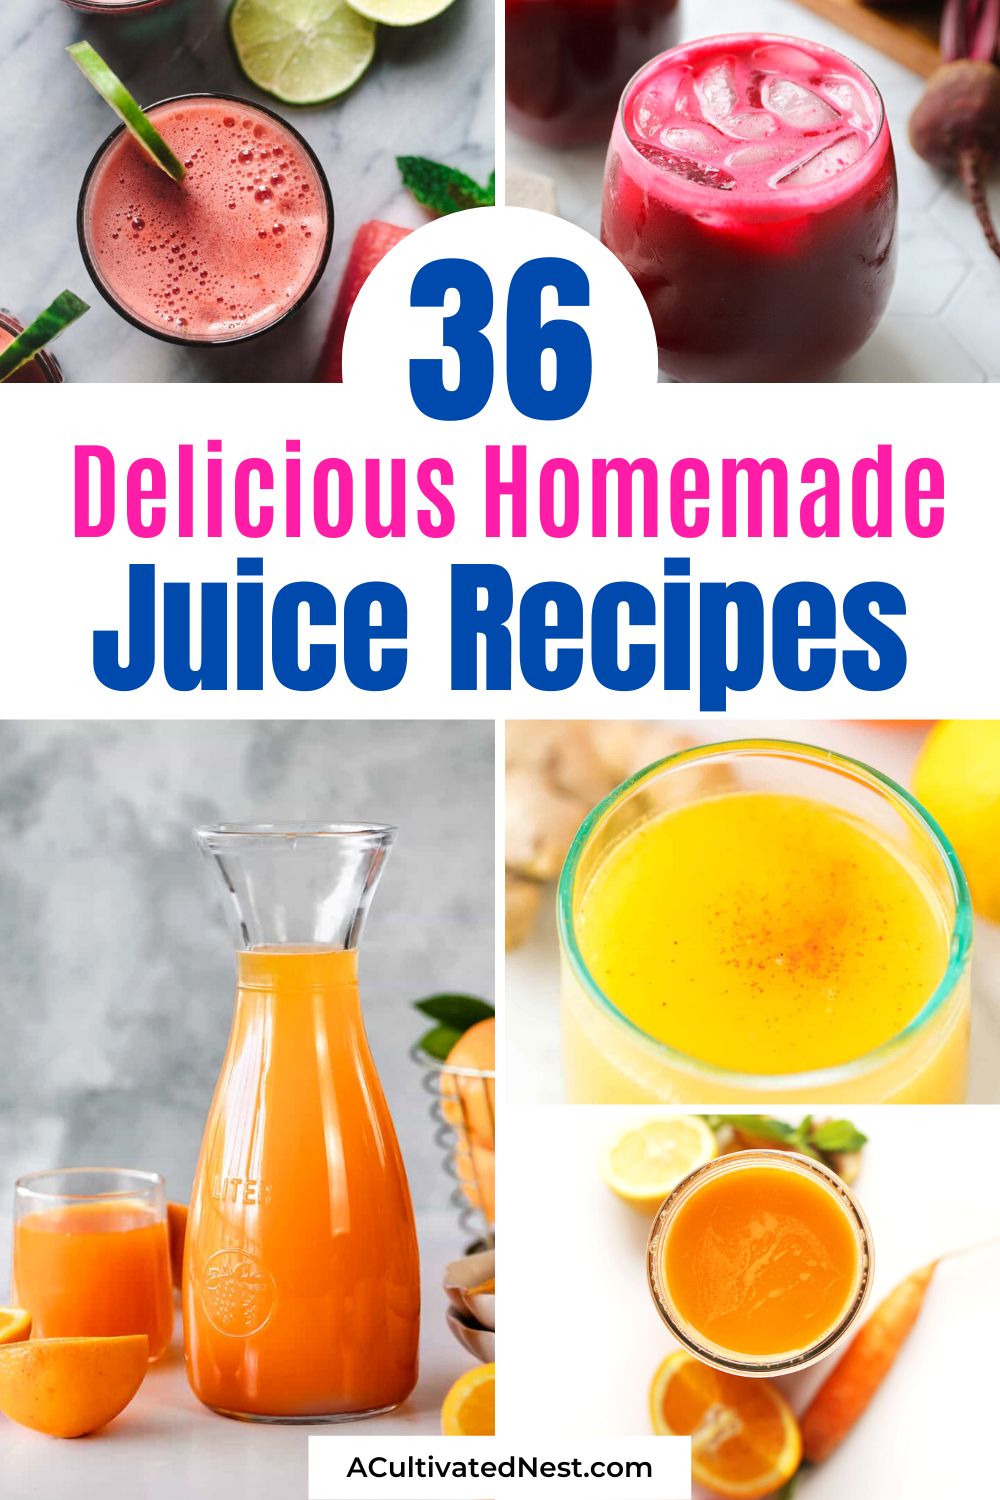 36 Delicious Homemade Juice Recipes- If you're looking for a delicious way to get your daily dose of healthy fruits and veggies, then you'll love these delicious homemade juice recipes! | healthy drink recipes, juicer recipes, #juice #homemadeDrinks #drinkRecipes #healthyRecipes #ACultivatedNest